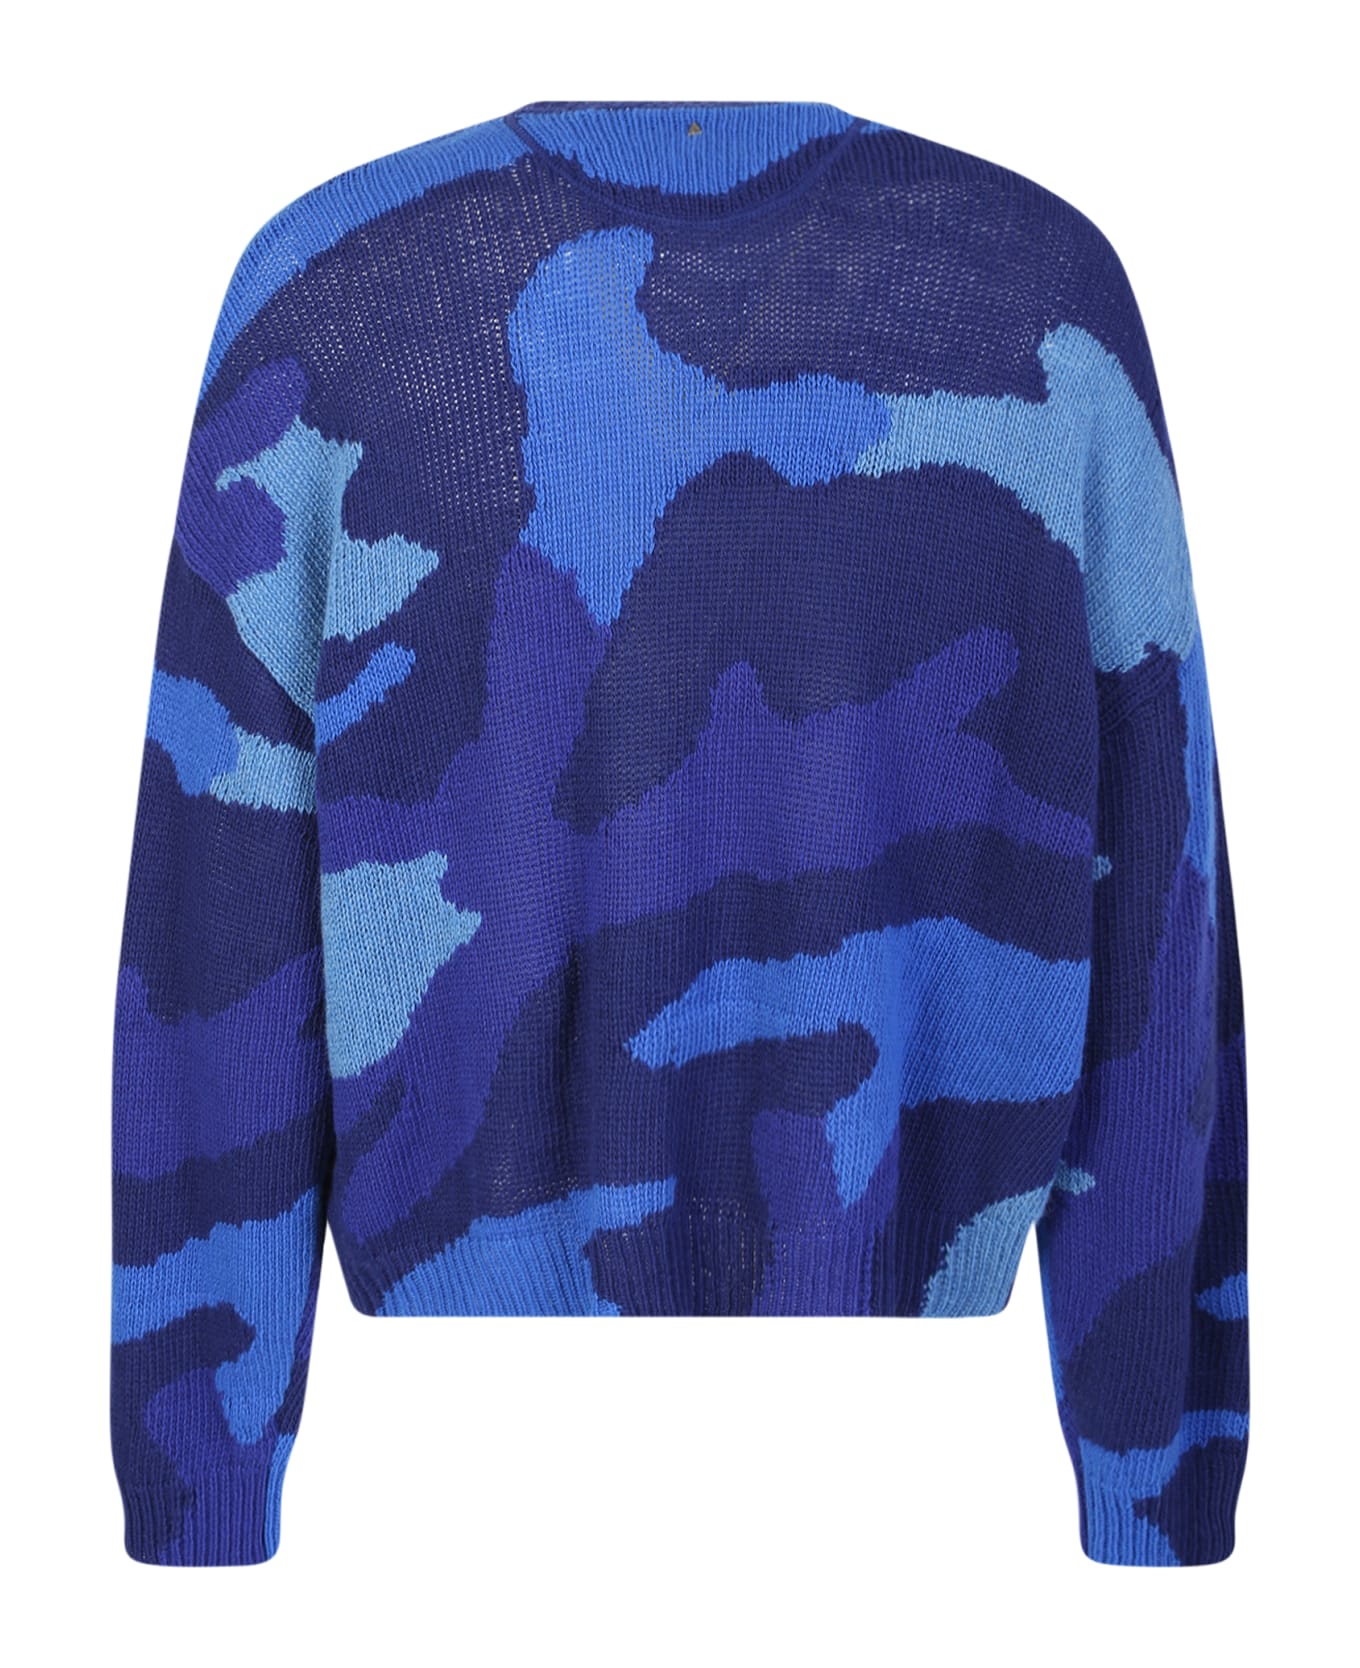 Valentino Pullover Made Of Pure Virgin Wool With A Camouflage Pattern - Blue